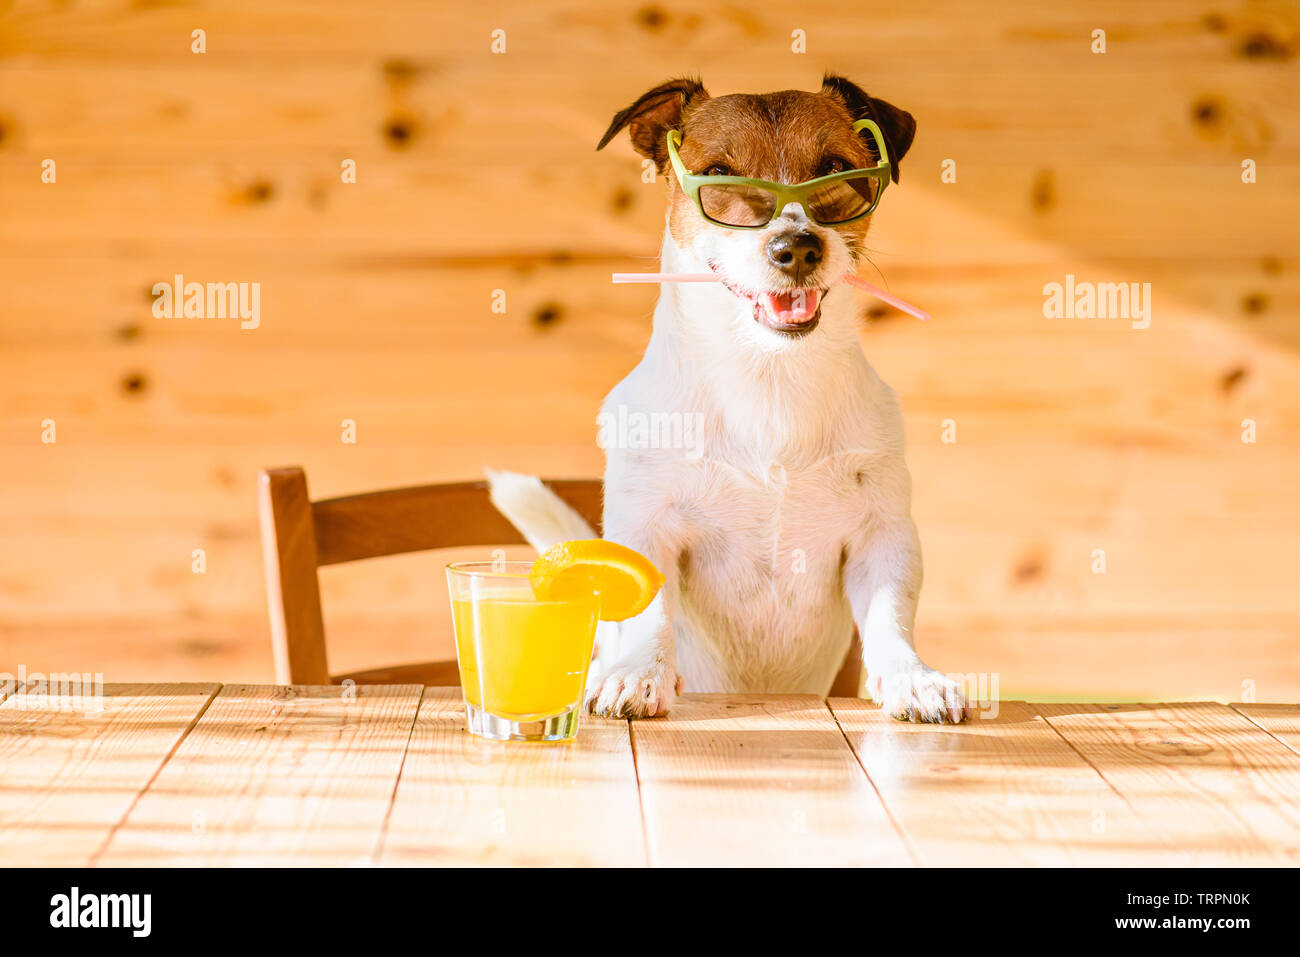 Fun, Vacation and Travel concept - dog with fresh orange juice holding cocktail straw in mouth relaxing in bar Stock Photo